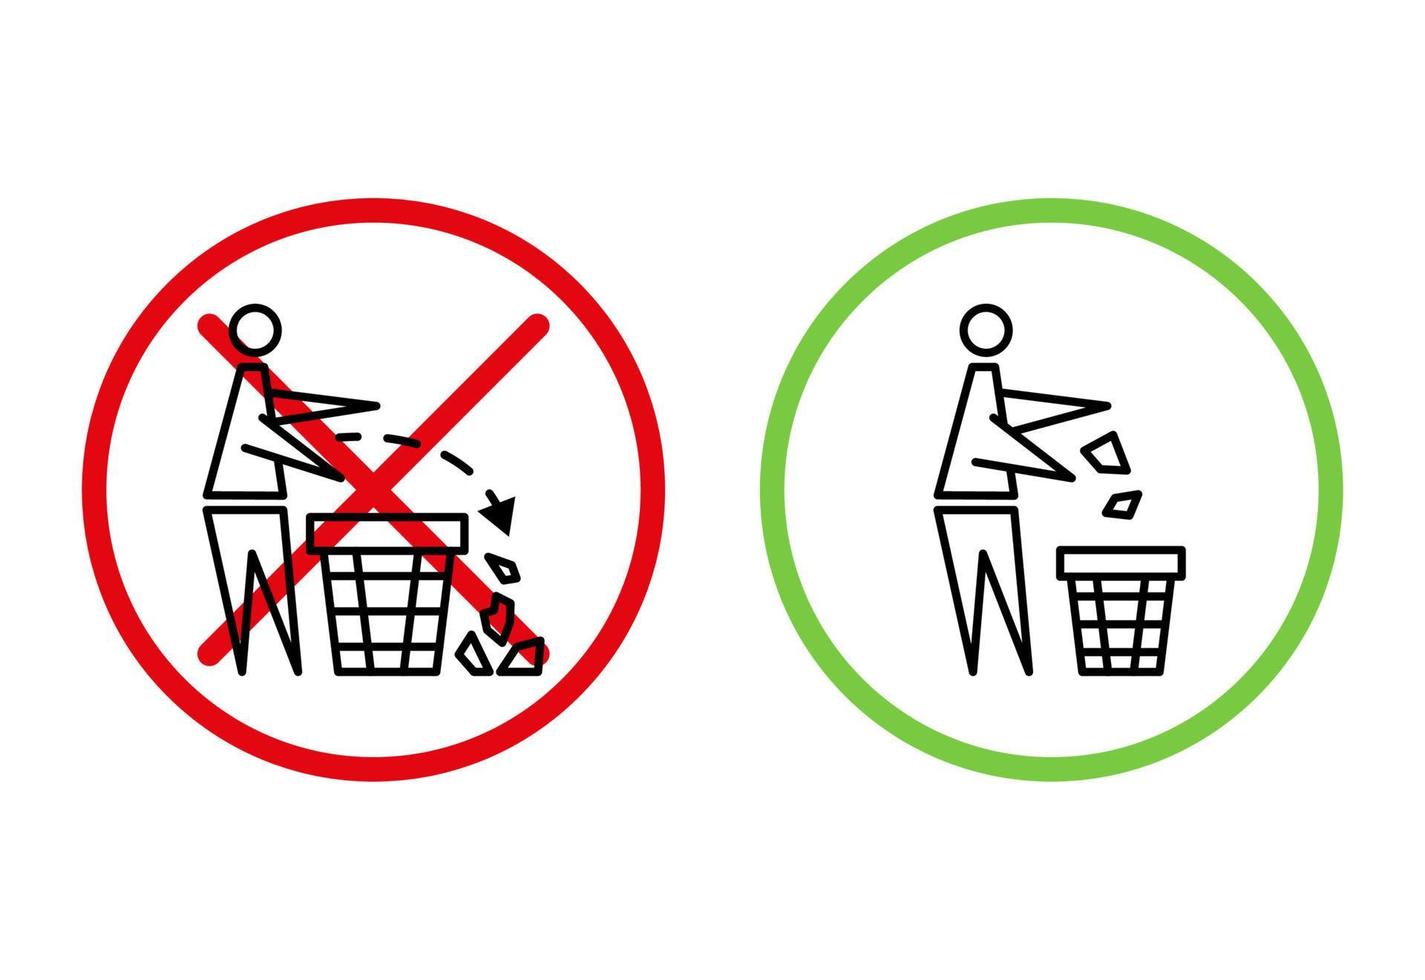 Keeping the clean. Forbidden icon. Pitch in put trash in its place. Tidy man, do not litter, icon. Please do not throw rubbish. Do not litter, place rubbish in bins provided vector